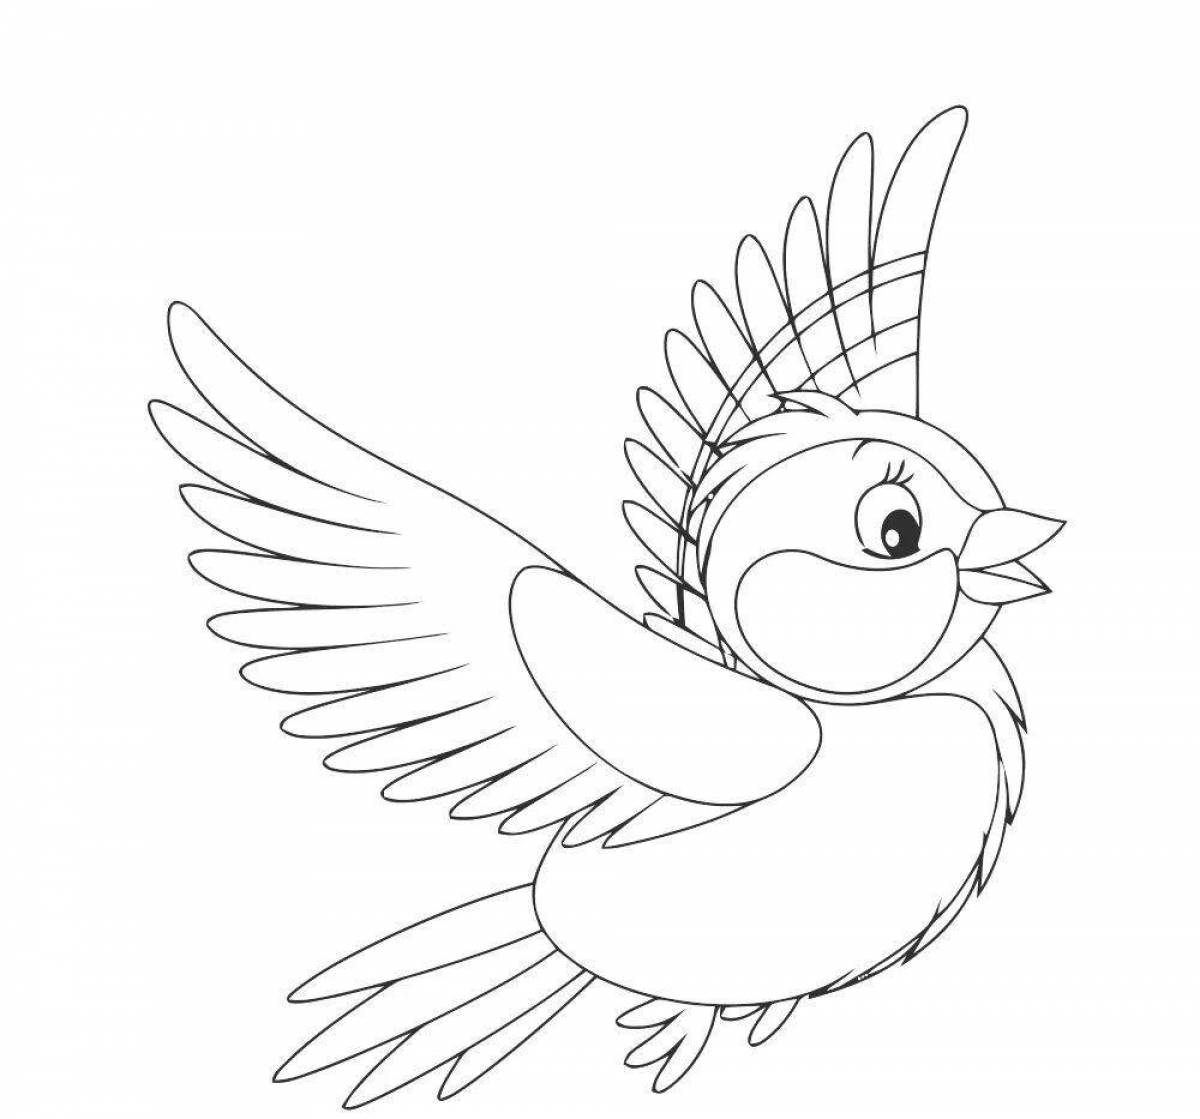 Fabulous Tits Coloring Page